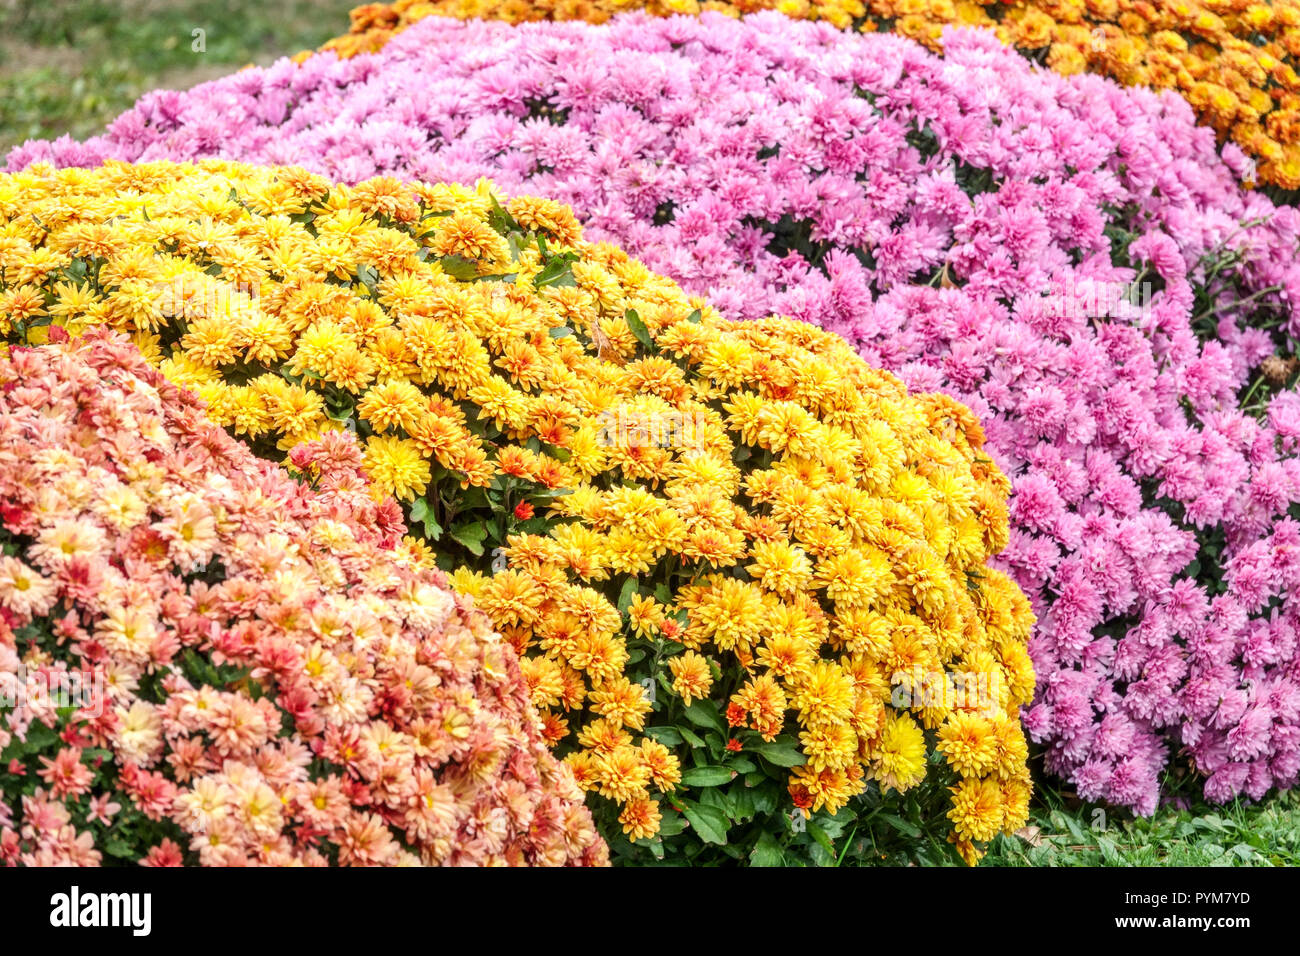 Many flowers, color combination Chrysanthemum, Autumn flowers in the garden, contrast and colourful flower bed October garden mums Stock Photo